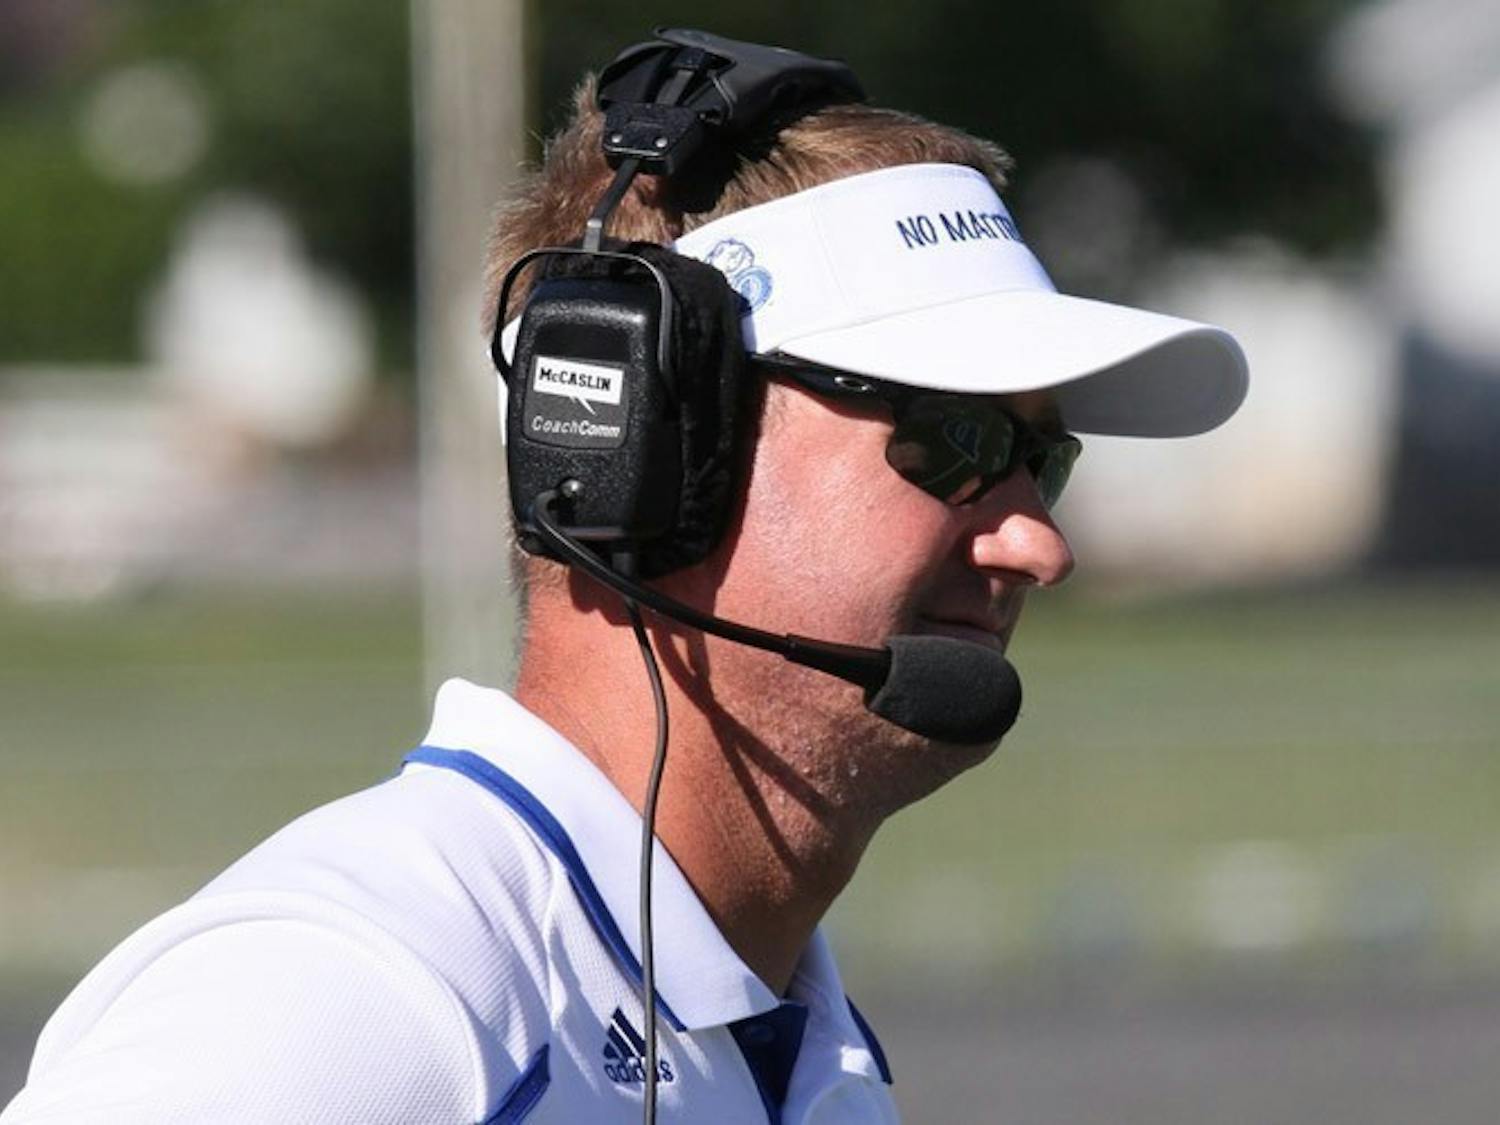 	Eastern Michigan University hired Brad McCaslin to be defensive coordinator. He served in the same role at Drake University, under Chris Creighton.